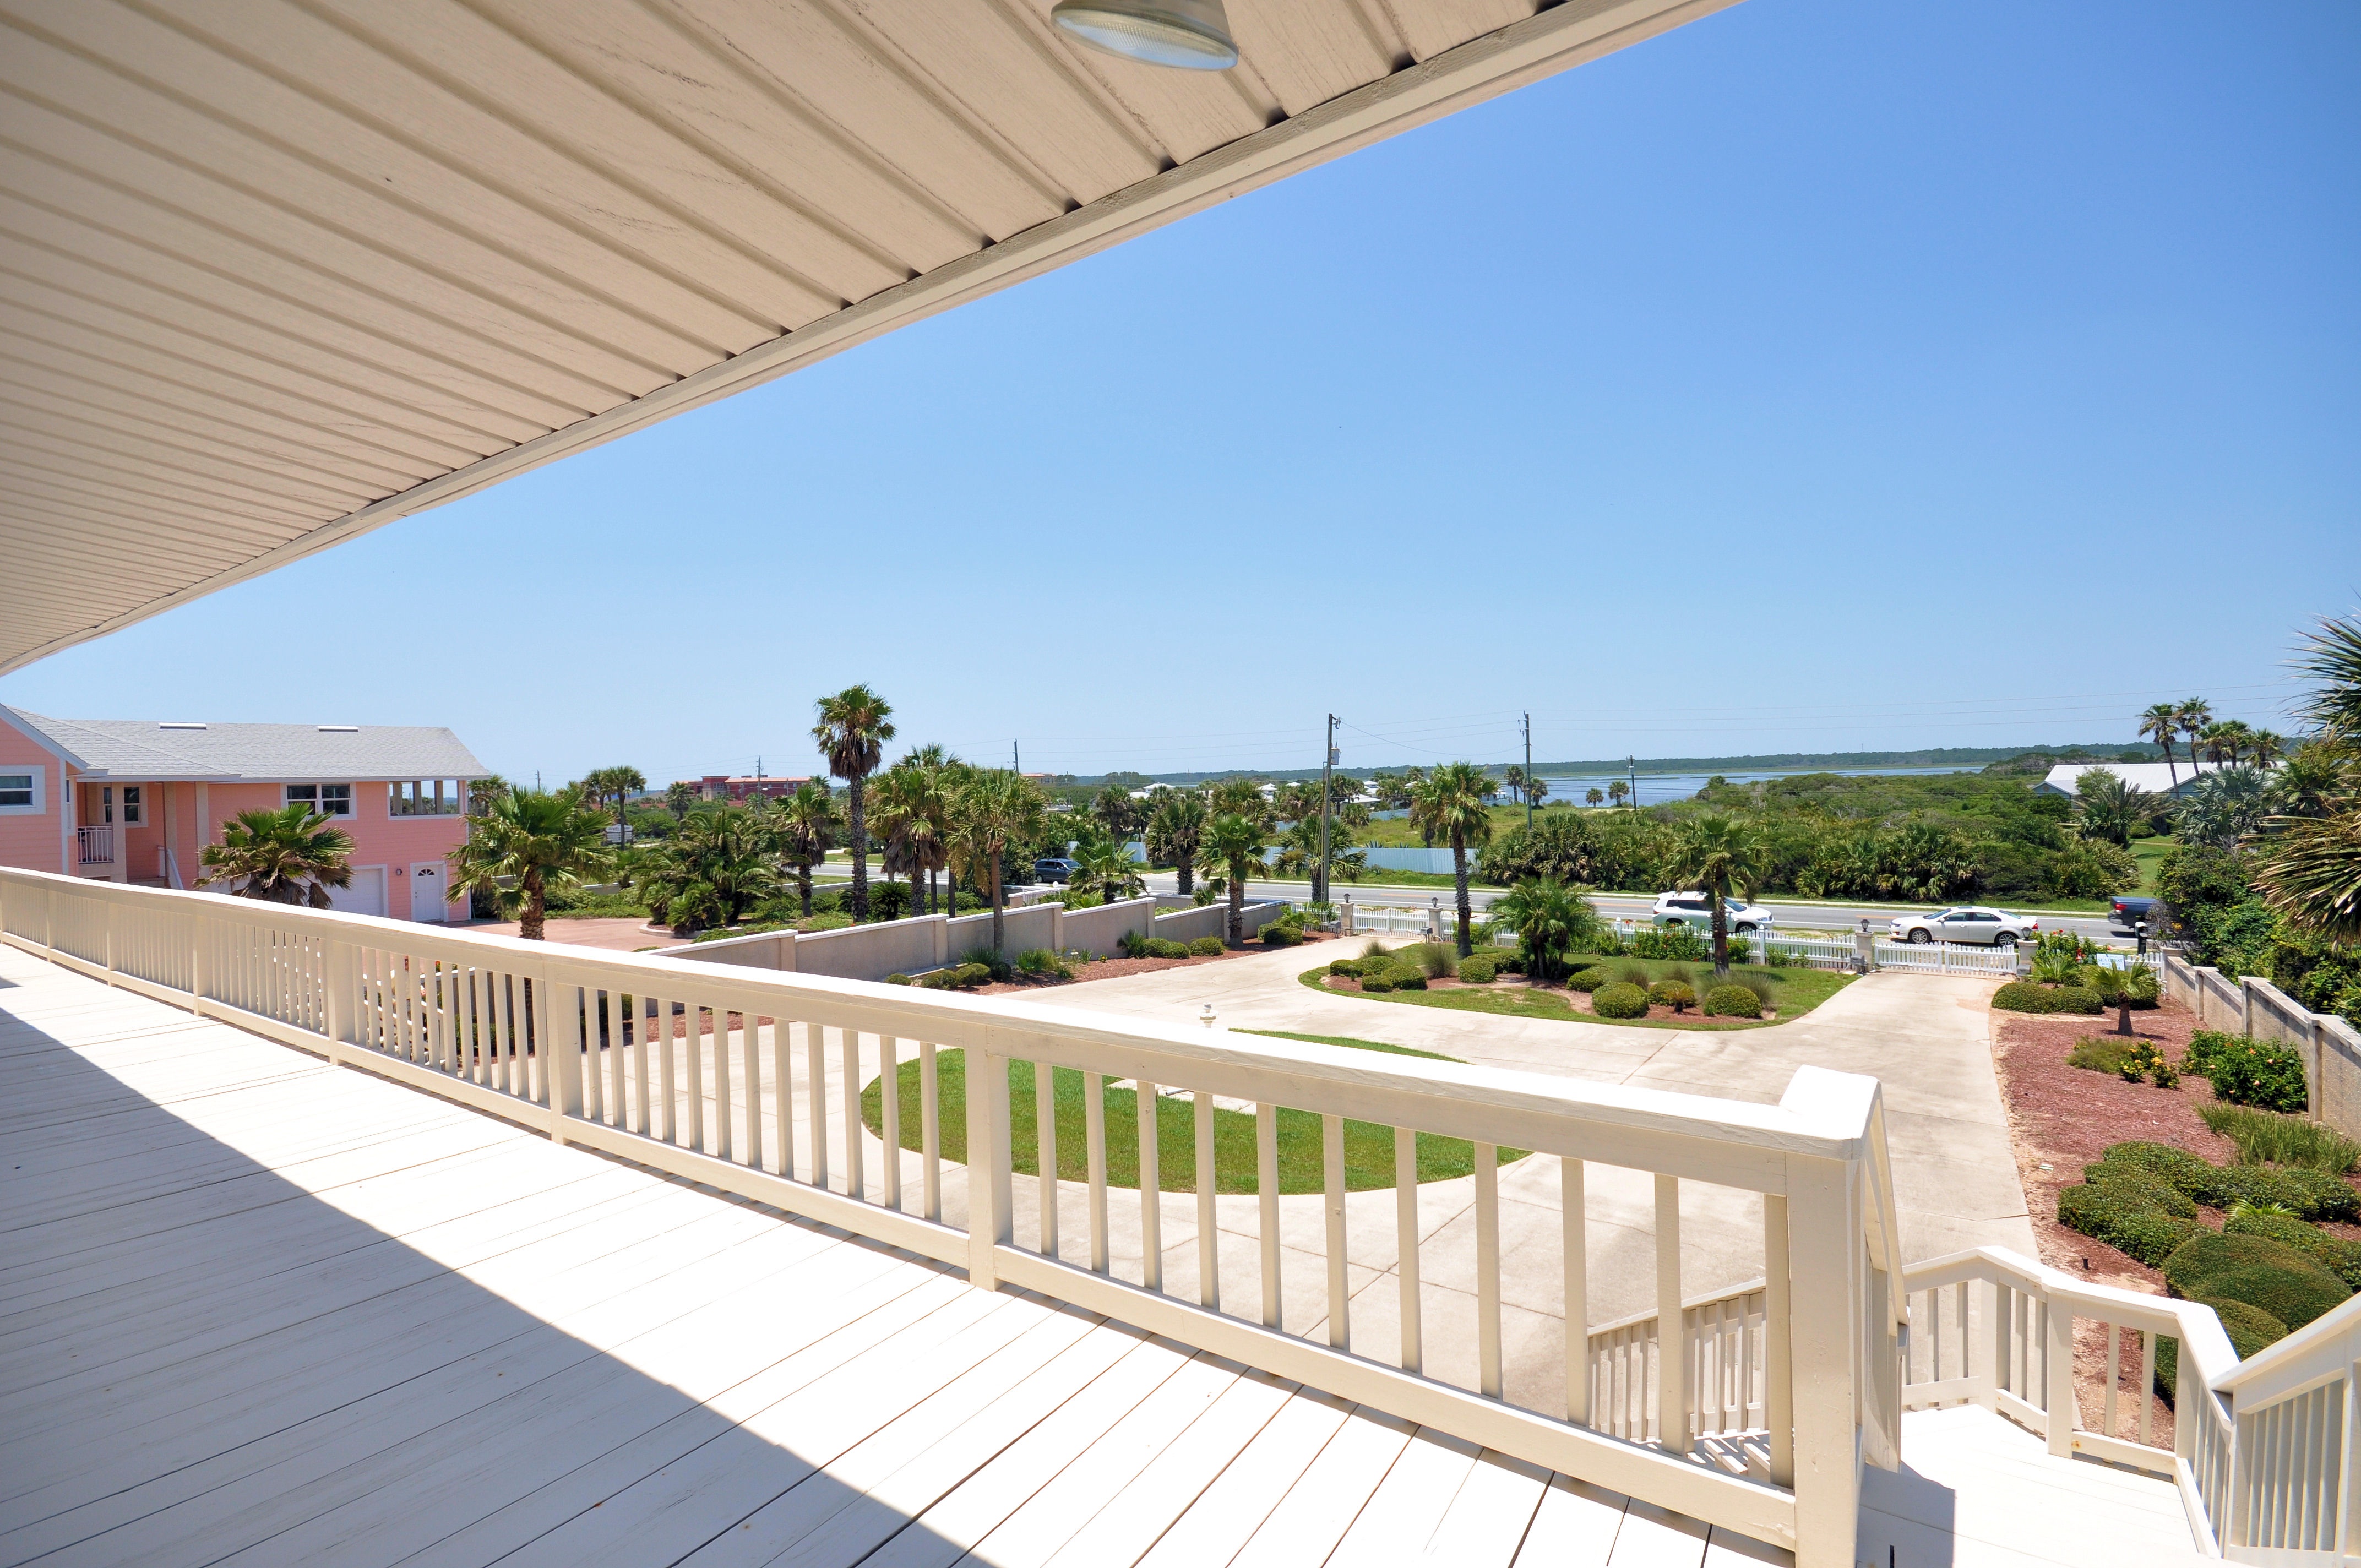 Interluxe Online Auction of Private Oceanfront Home in St. Augustine, Florida Opens Bidding on November 8th